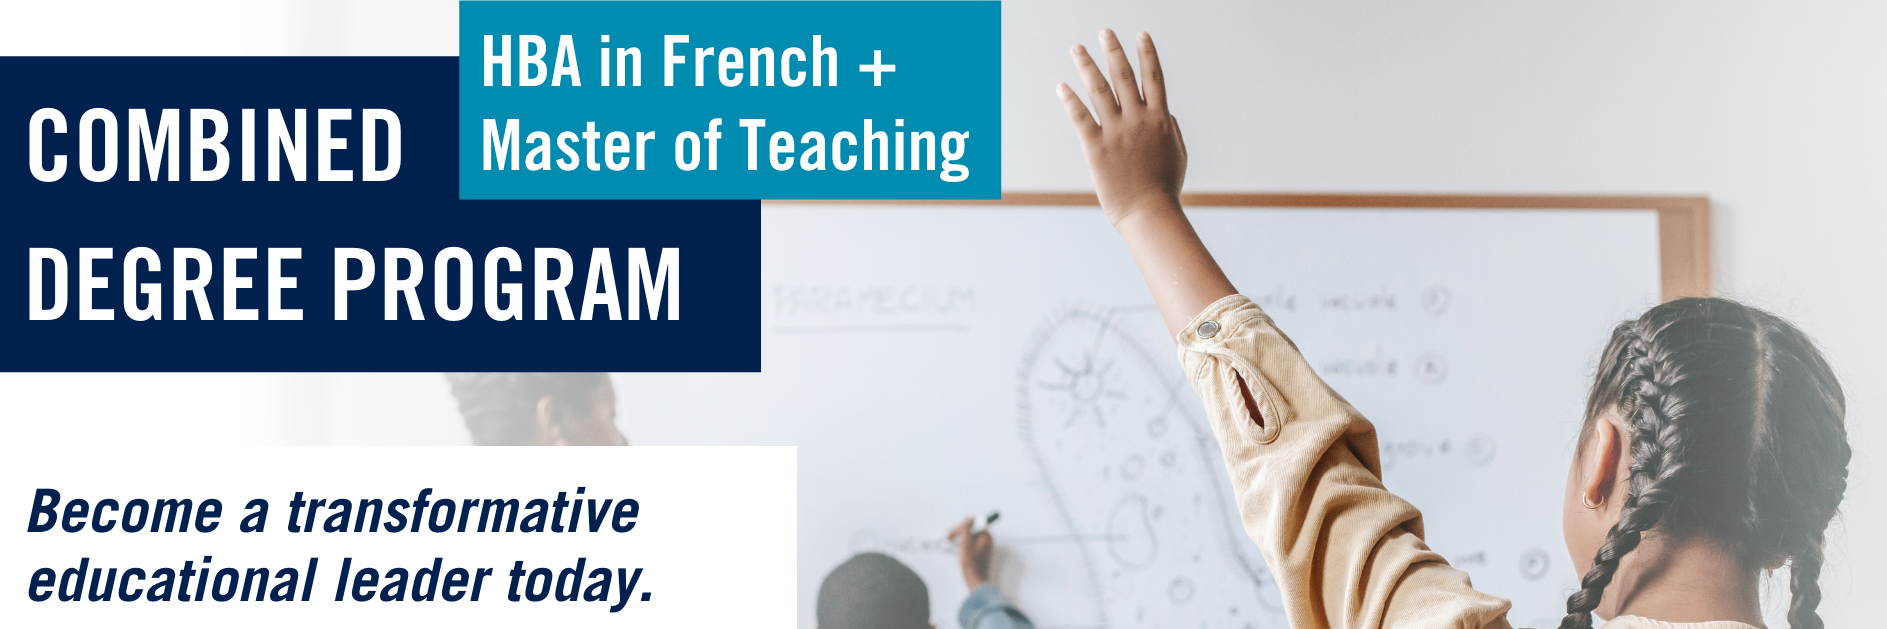 HBA in French + Master of Teaching